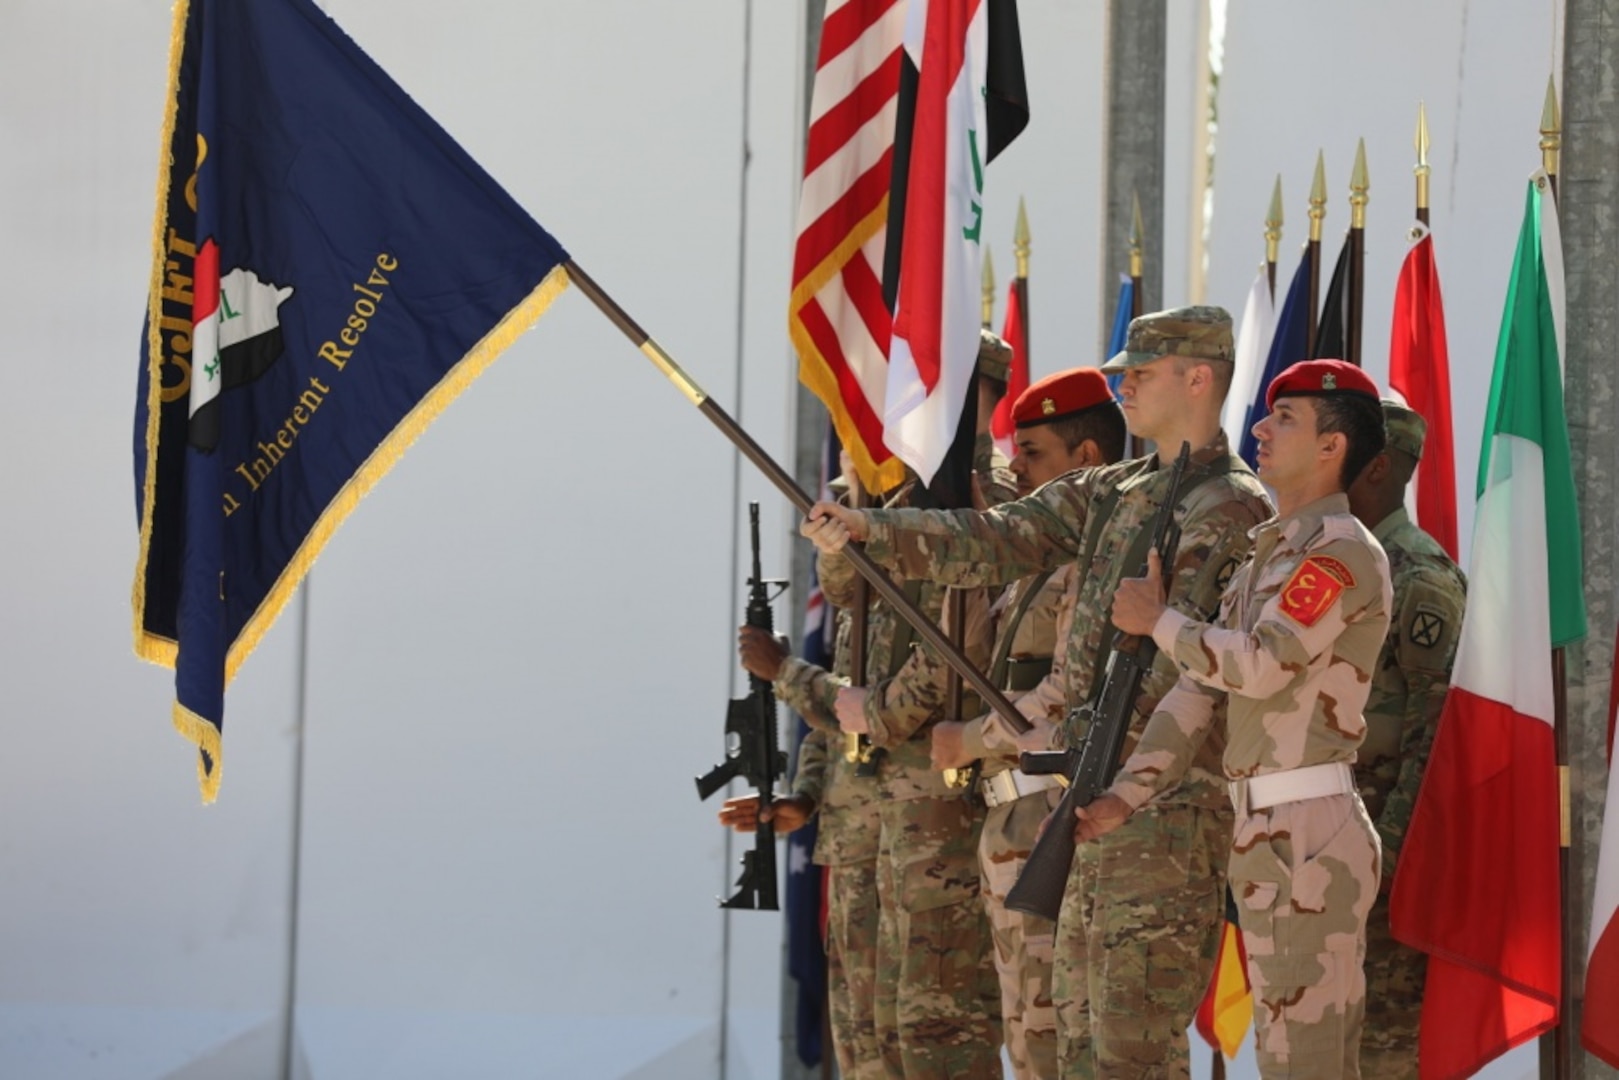 Coalition members with the Combined Joint Forces Land Component Command color guard render a salute during the command’s deactivation ceremony at Baghdad, Iraq.